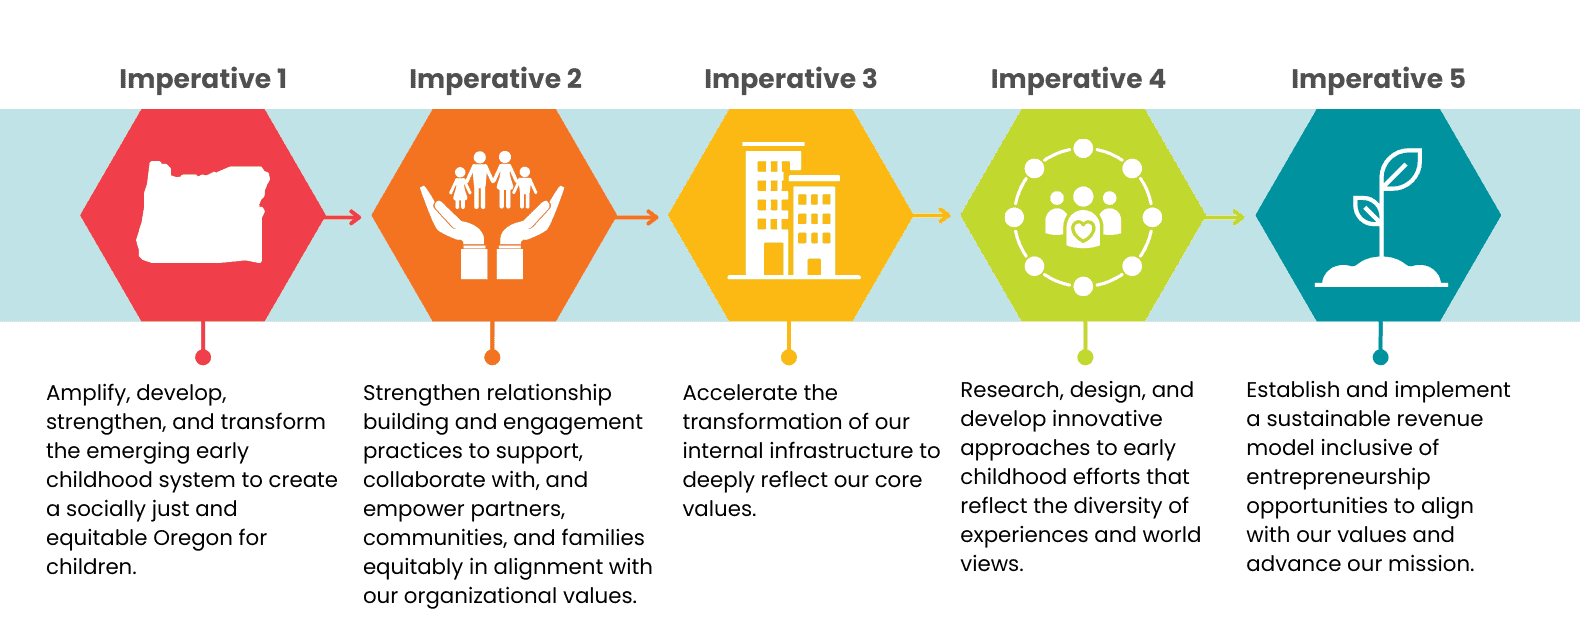 This image shows a breakdown of the five strategic imperatives at CI. This includes descriptions of each and an icon / color, moving from red to orange to yellow to green to blue. 